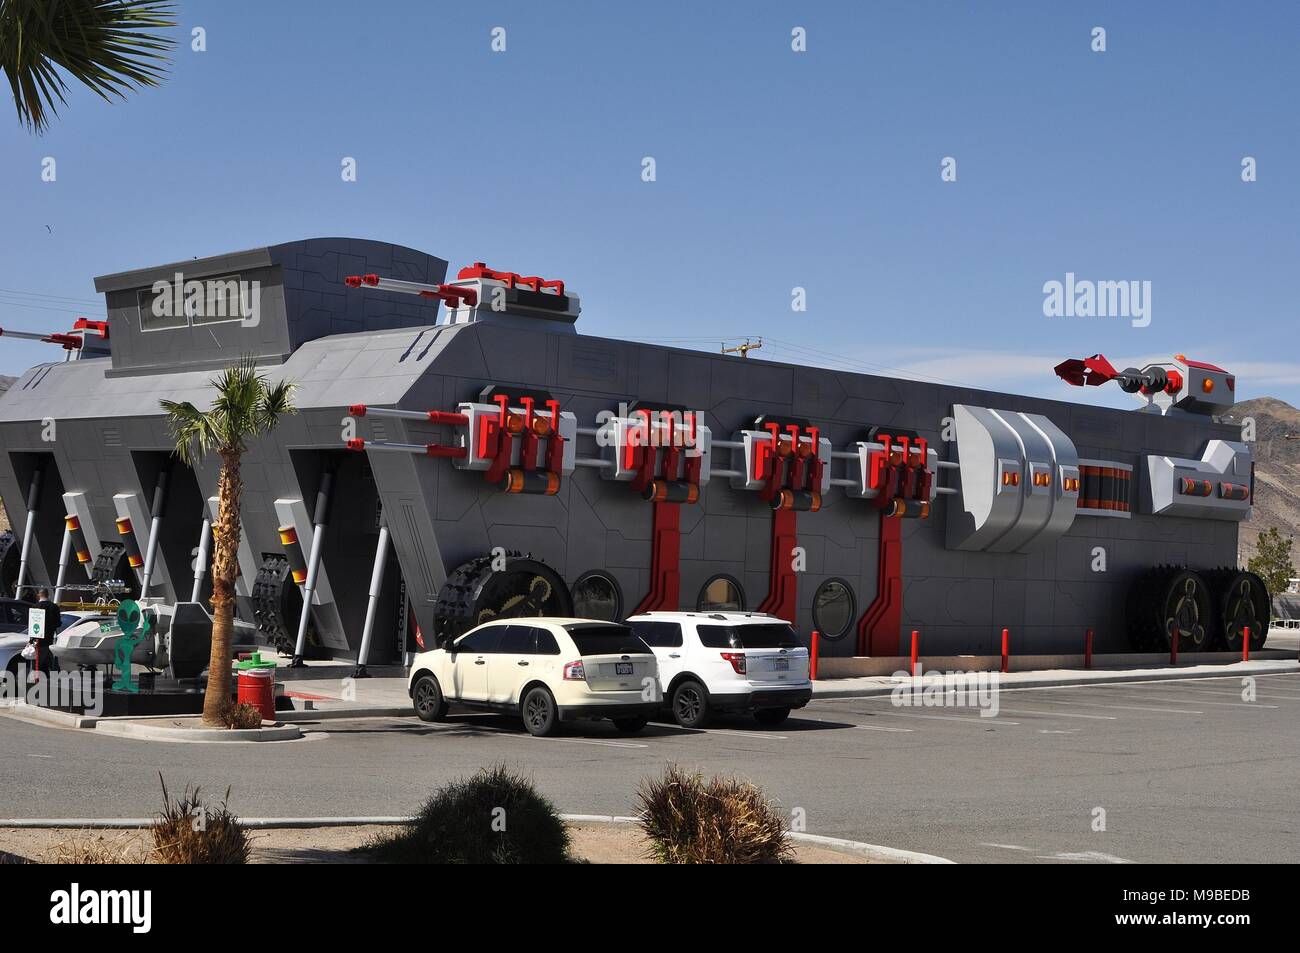 ALIEN BEEF JERKY SHOP AND UFO HOTEL AT BAKER, CALIFORNIA. Stock Photo